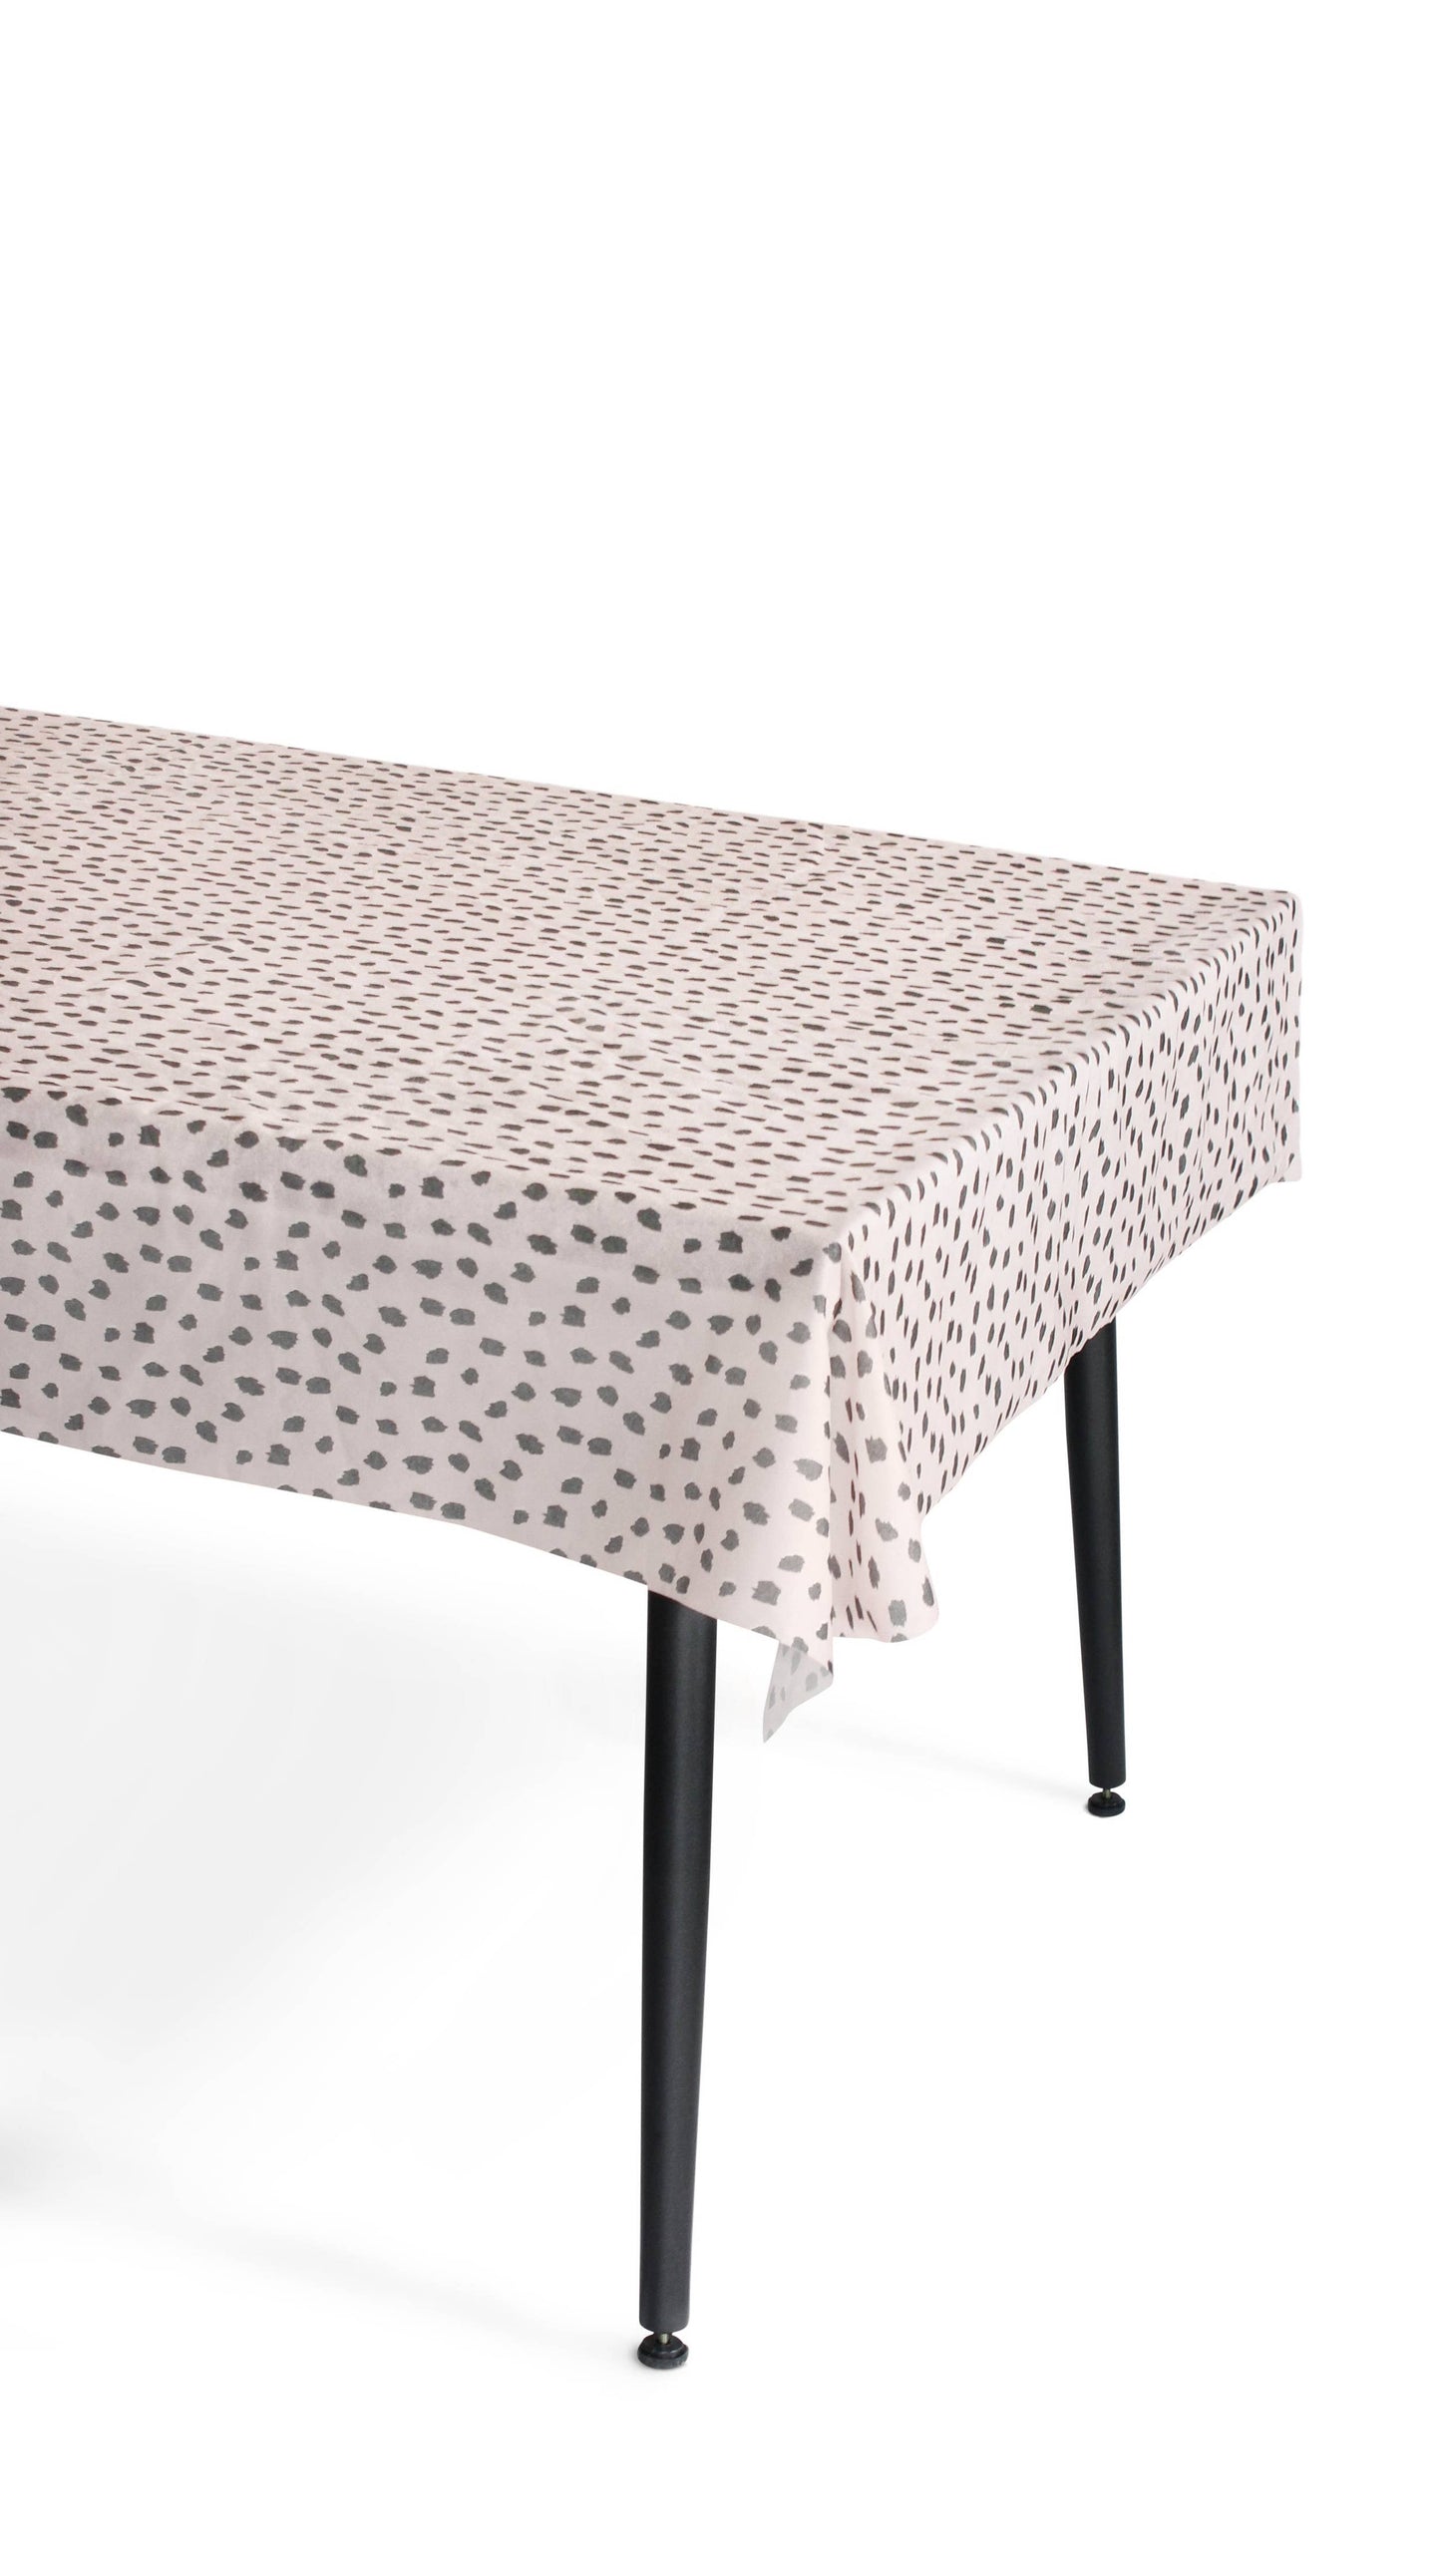 Blush Spotted Tablecloth